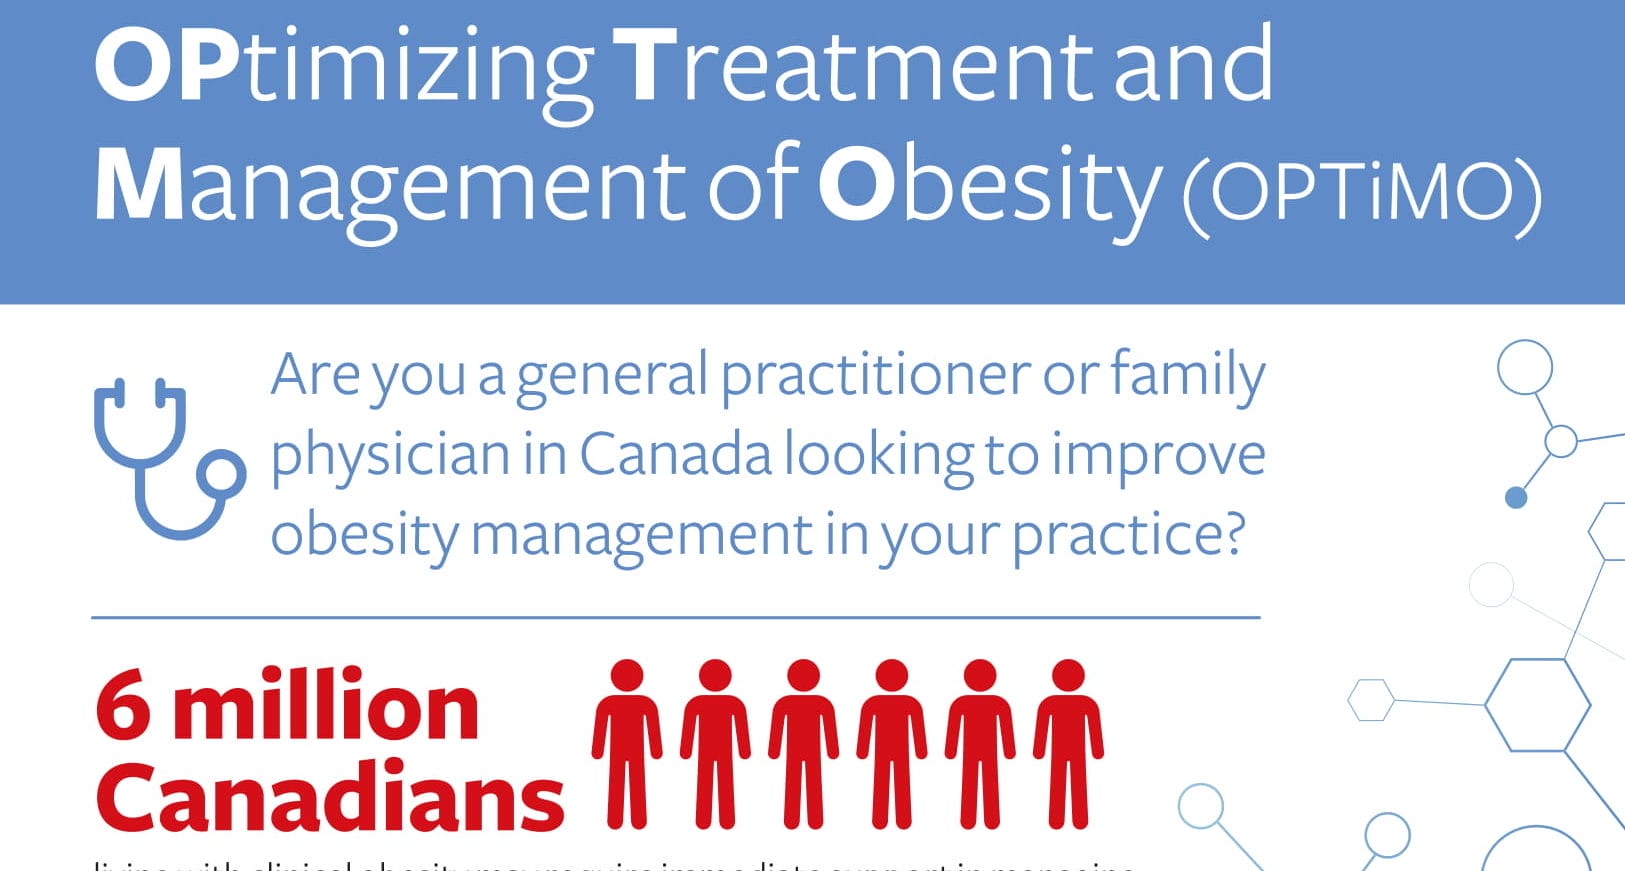 Infographic titled "optimizing treatment and management of obesity (optimo)" targets canadian general practitioners and family physicians, highlighting obesity management for 6 million canadians.